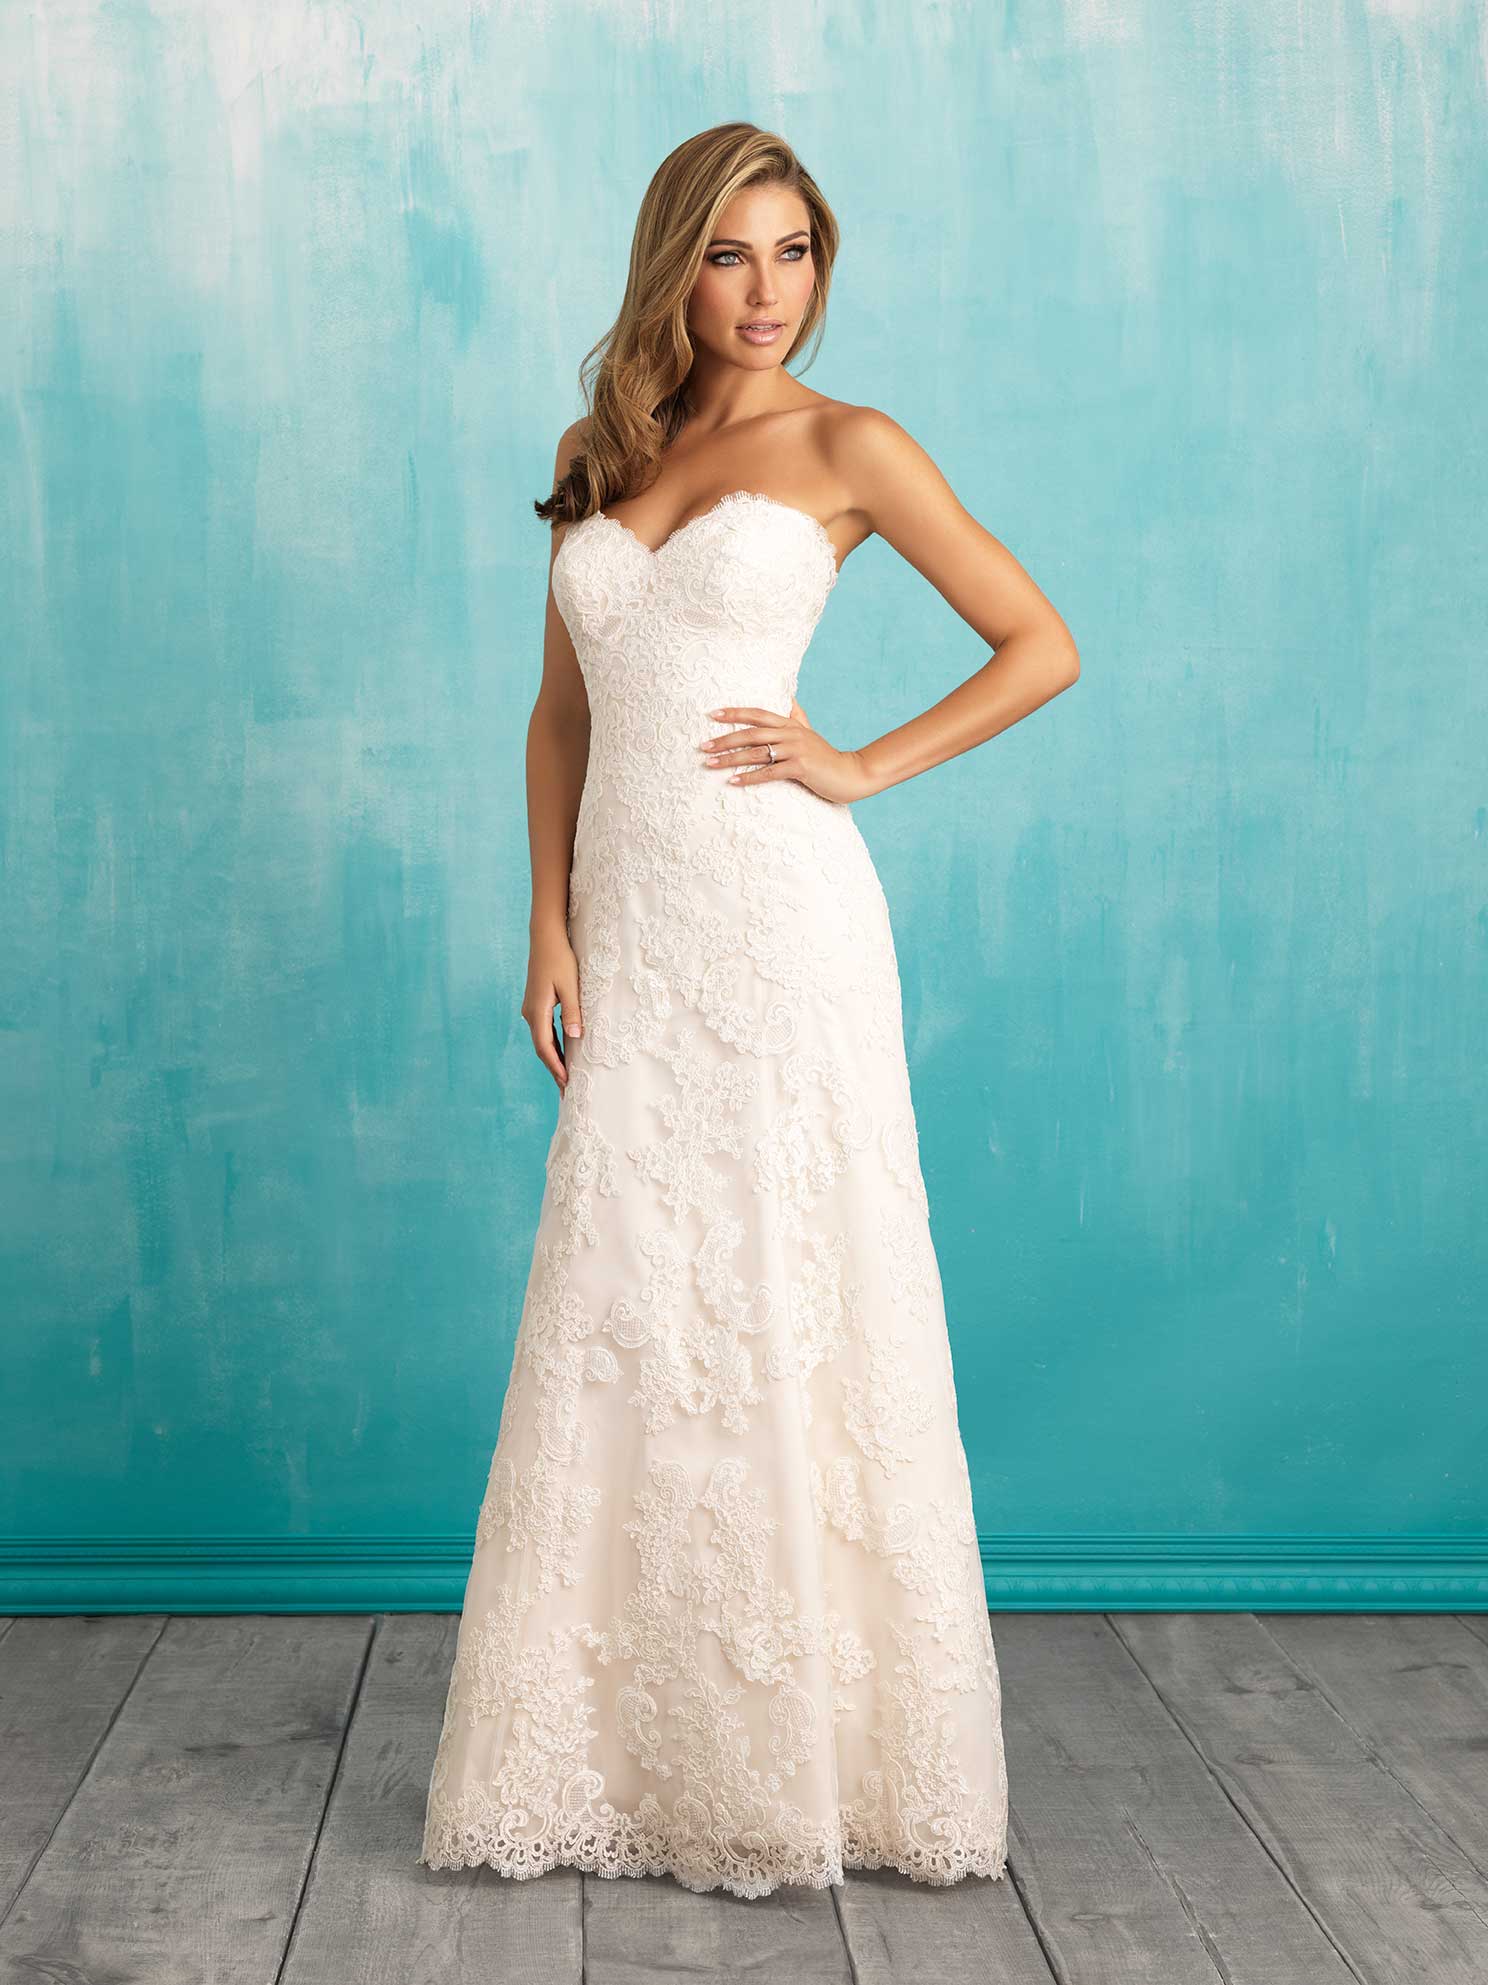 A lace dress by Allure Bridal